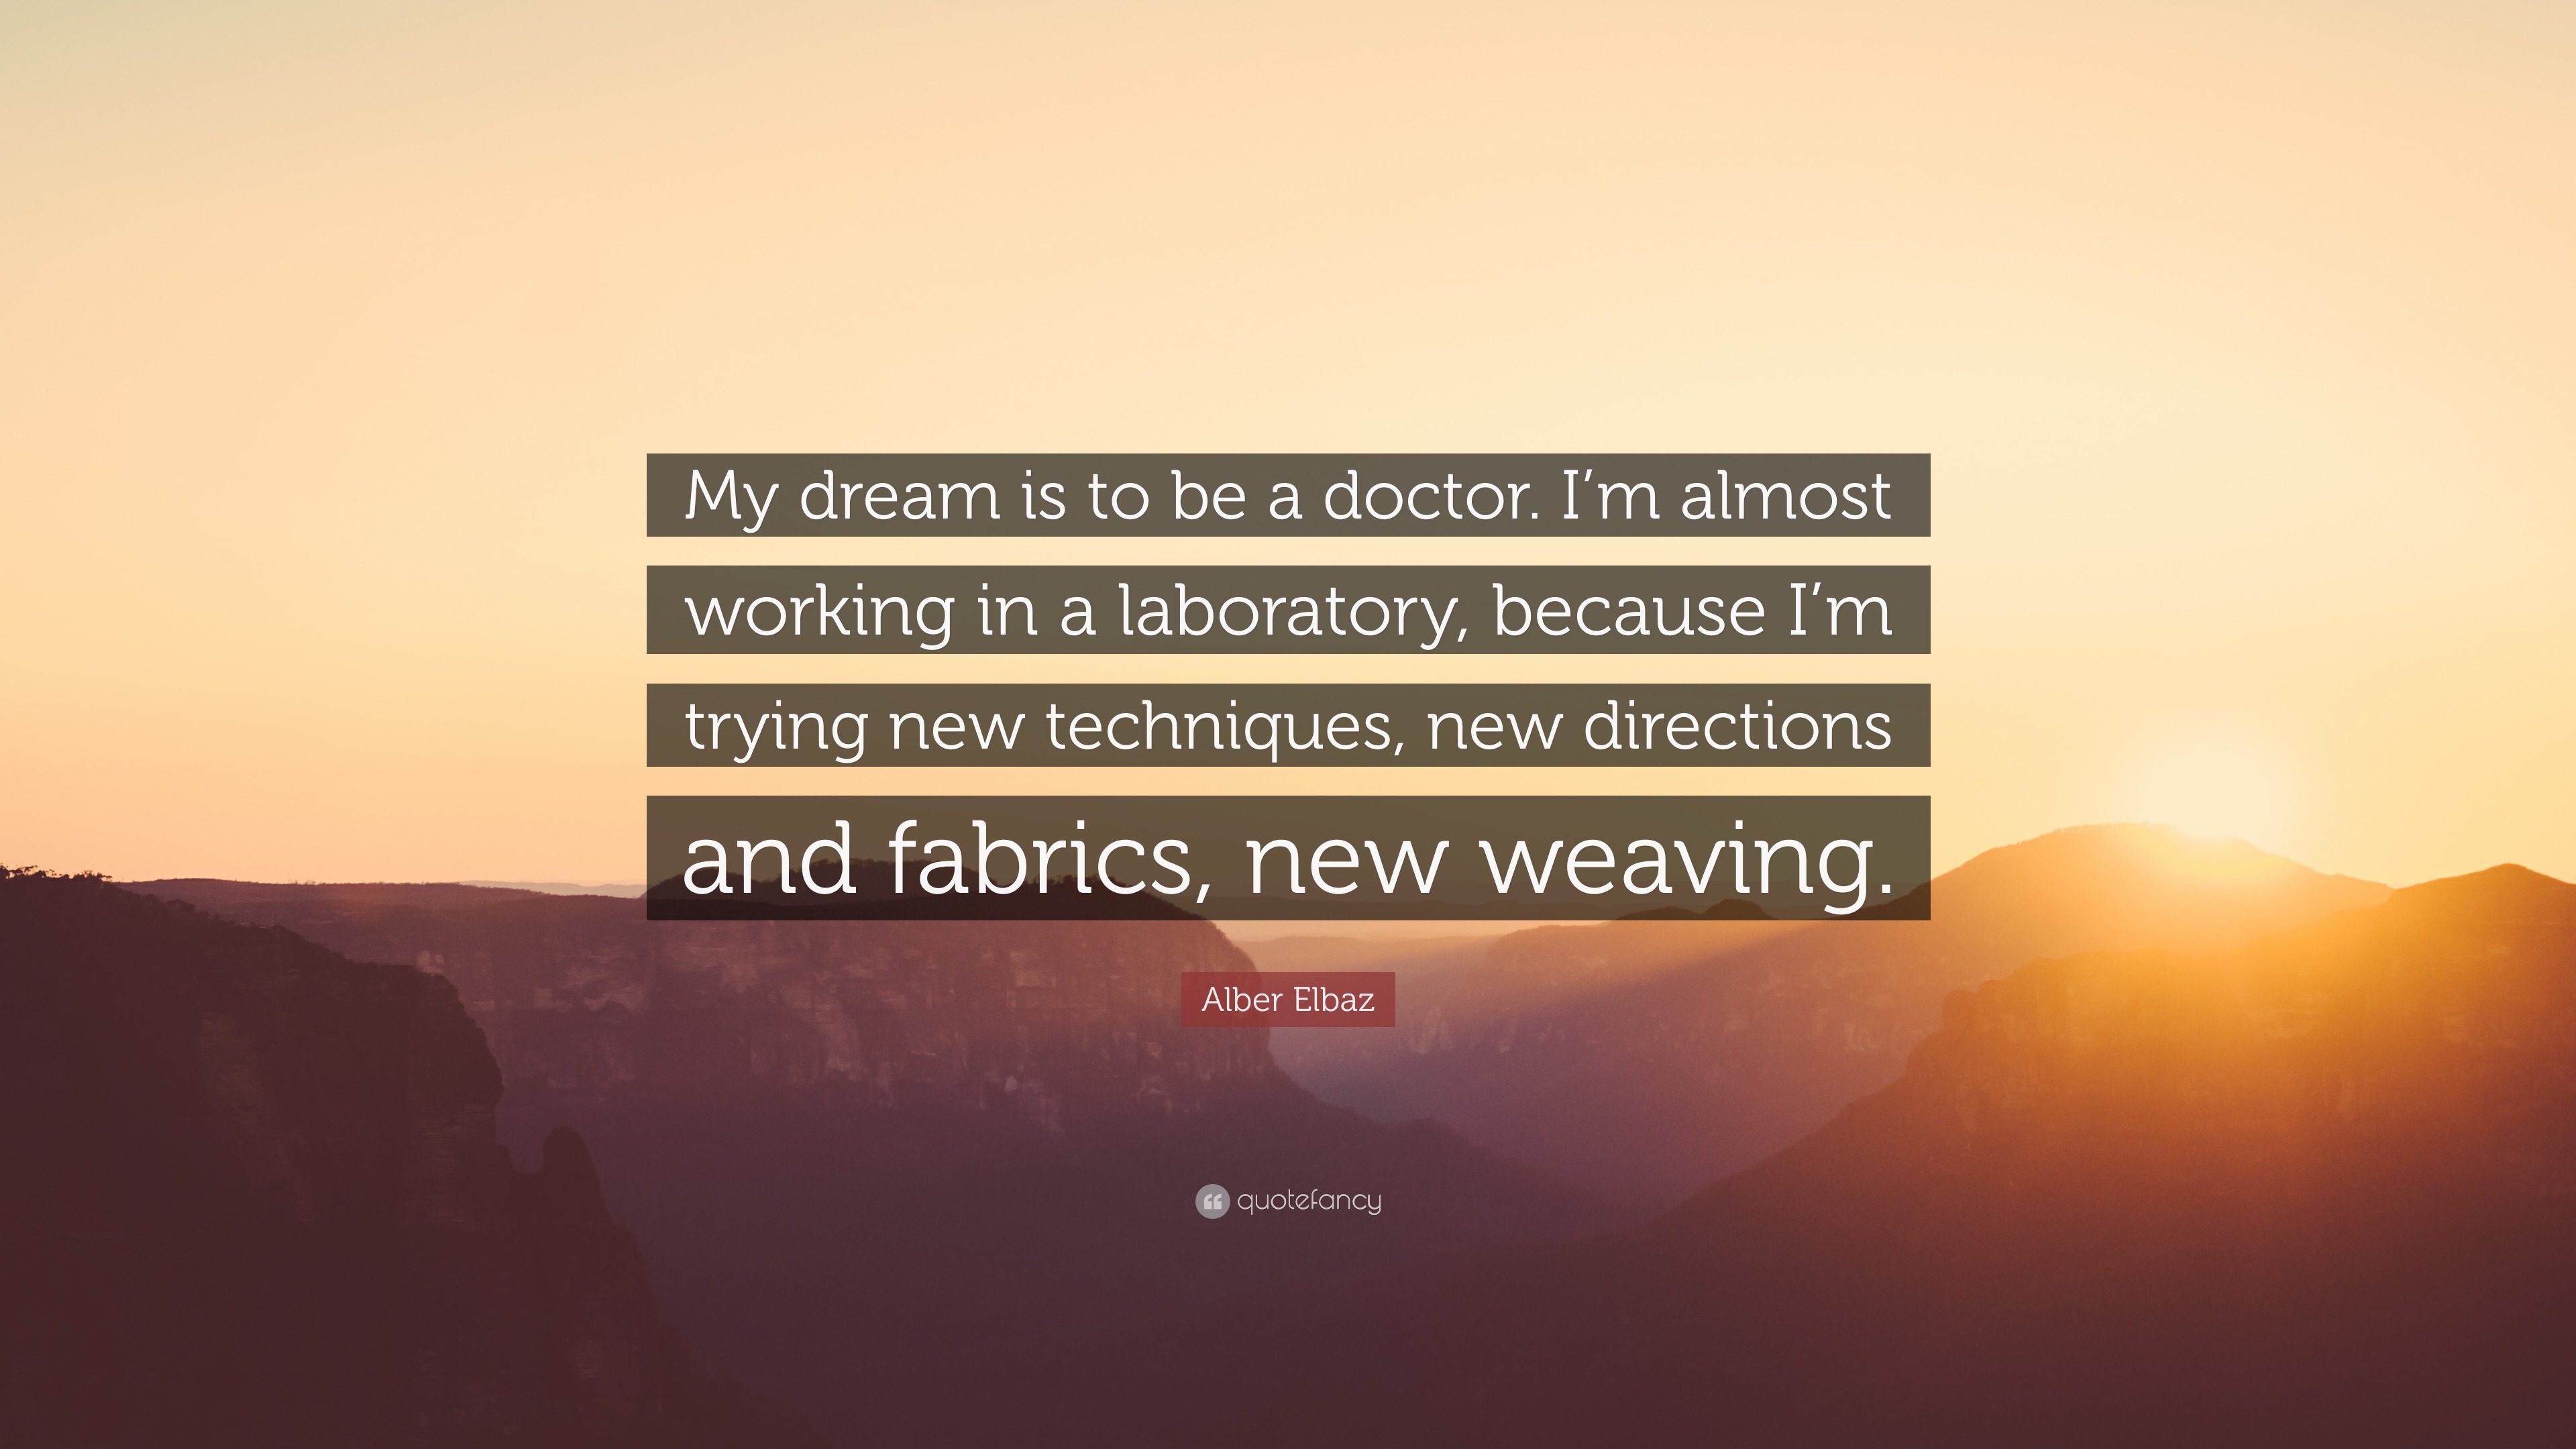 Alber Elbaz quote: My dream is to be a doctor. I'm almost working